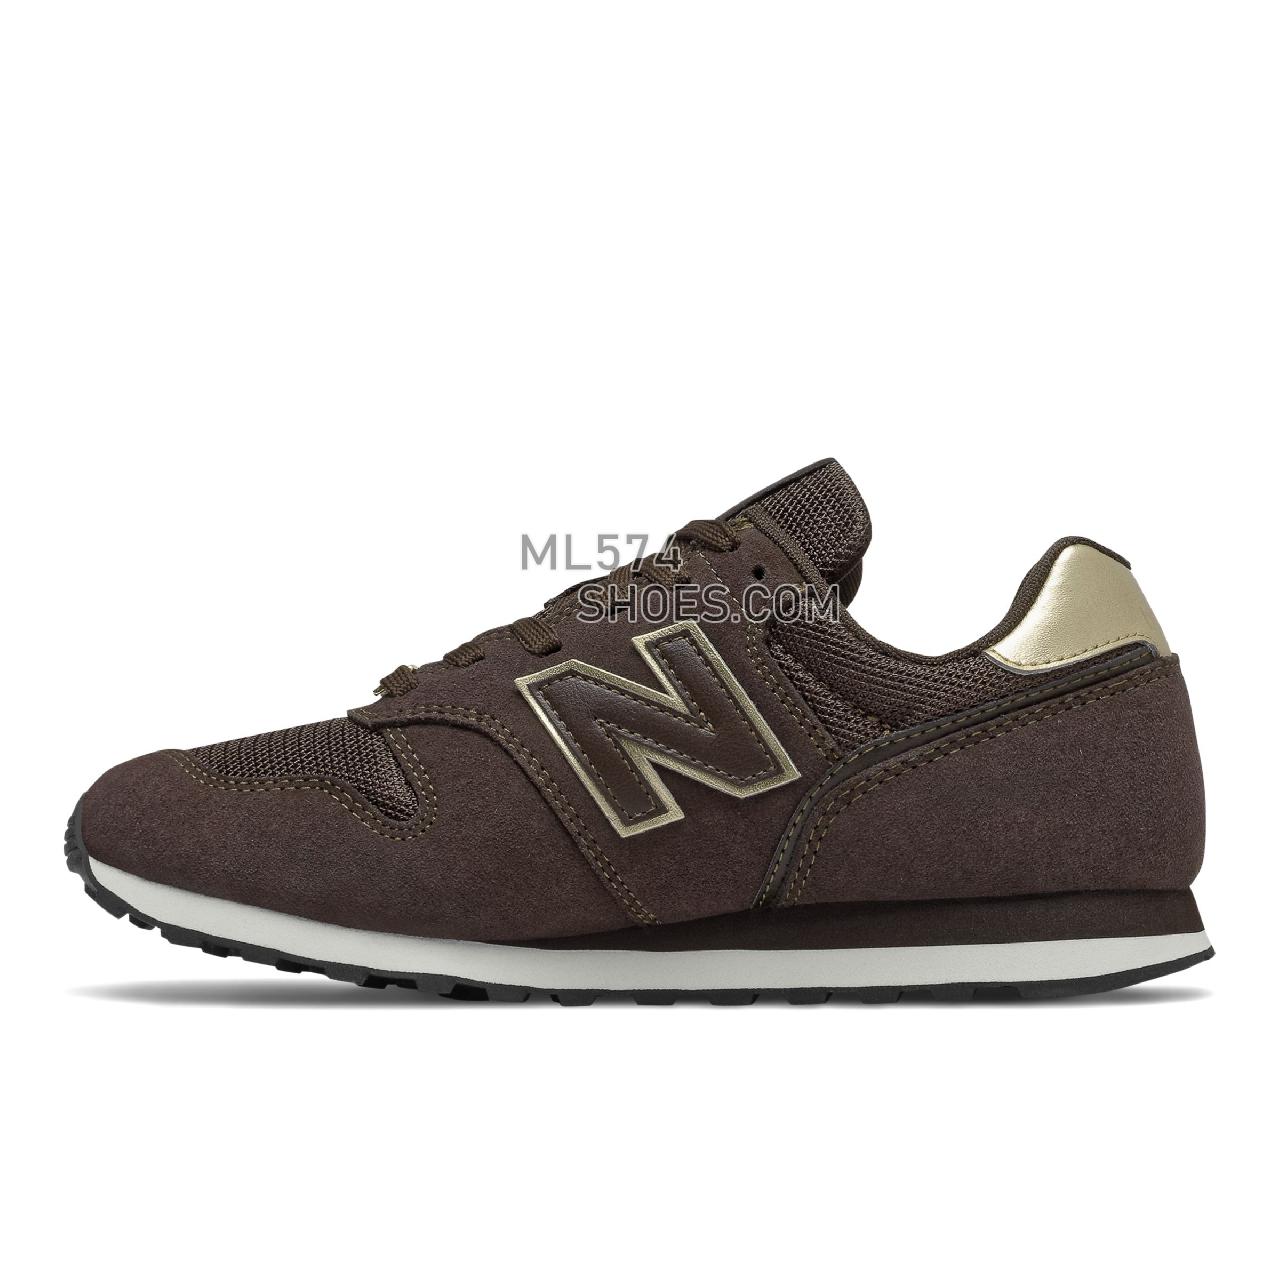 New Balance 373V2 - Women's Classic Sneakers - Black Coffee with Gold Metallic - WL373MM2